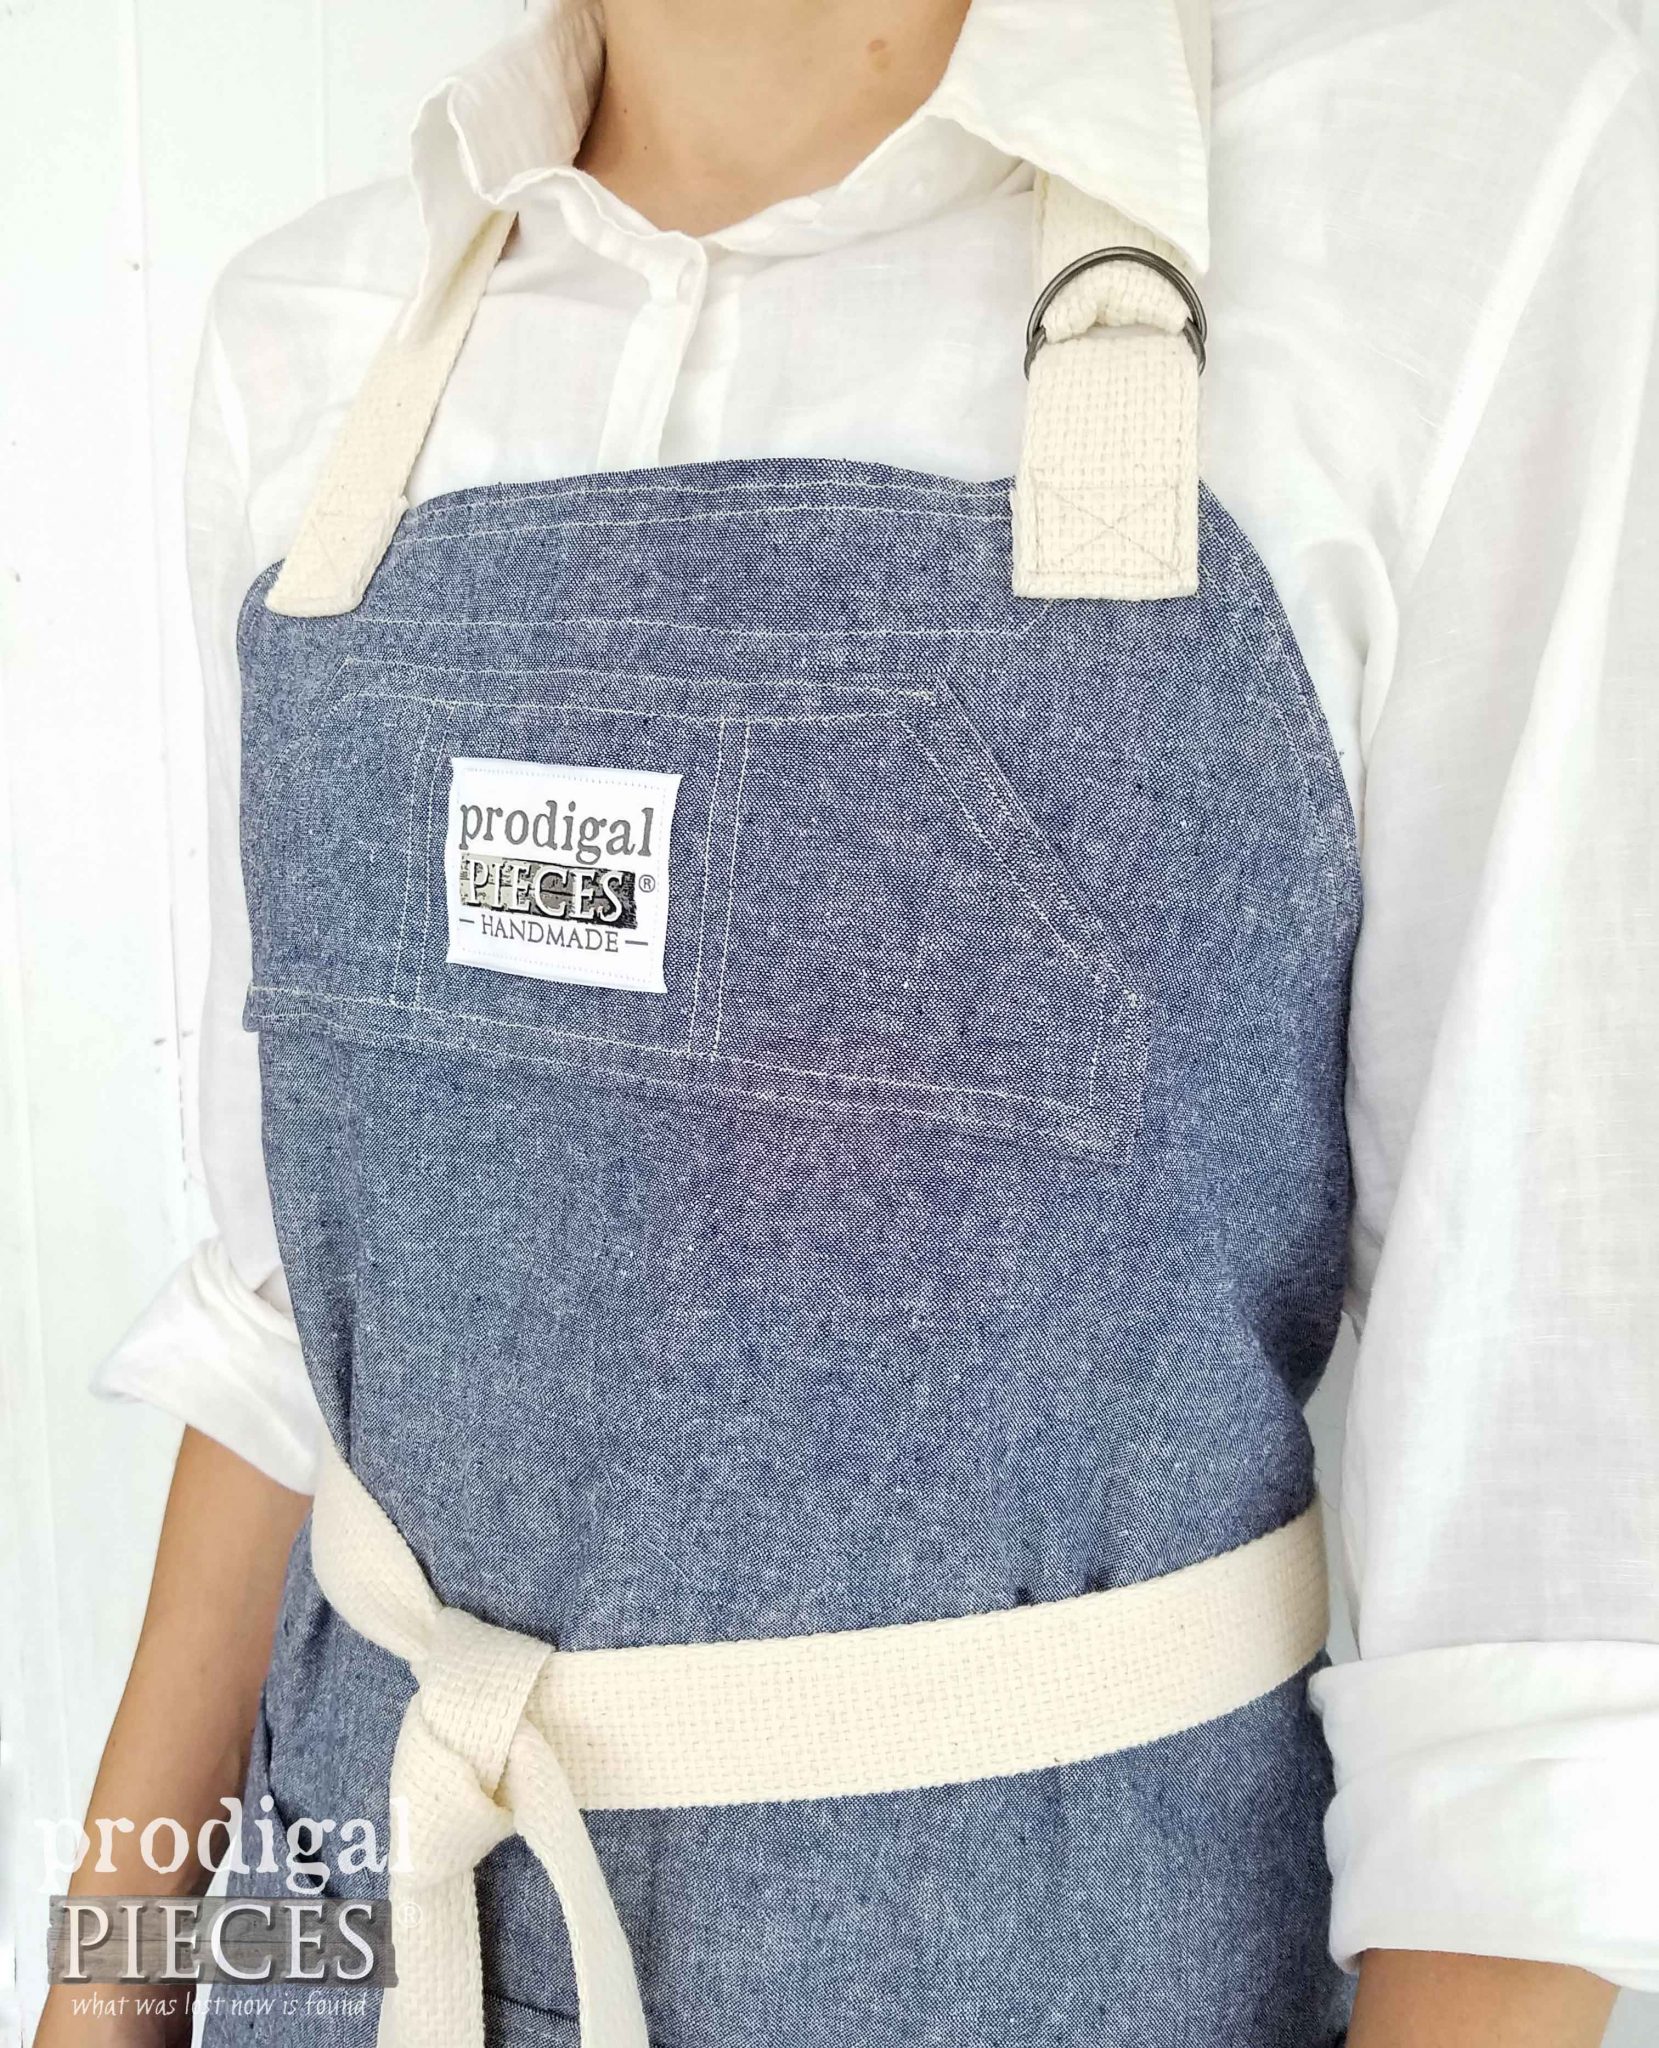 Linen Bib Apron with Pockets and Adjustable Neck Strap by Prodigal Pieces | prodigalpieces.com